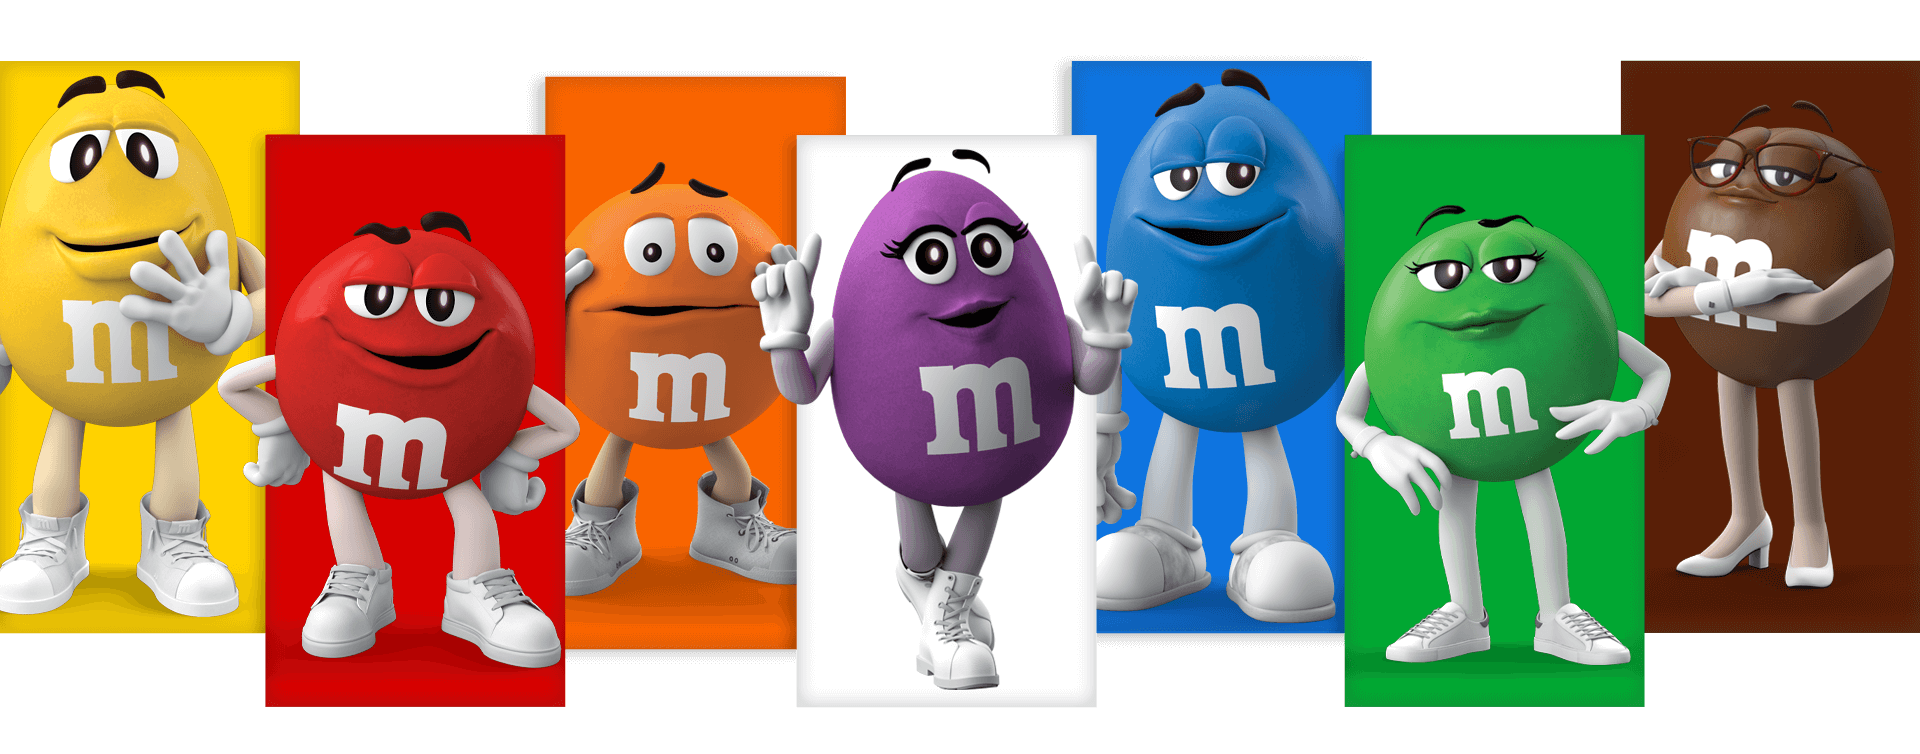 America’s outrage over the new M&M figurines is justified